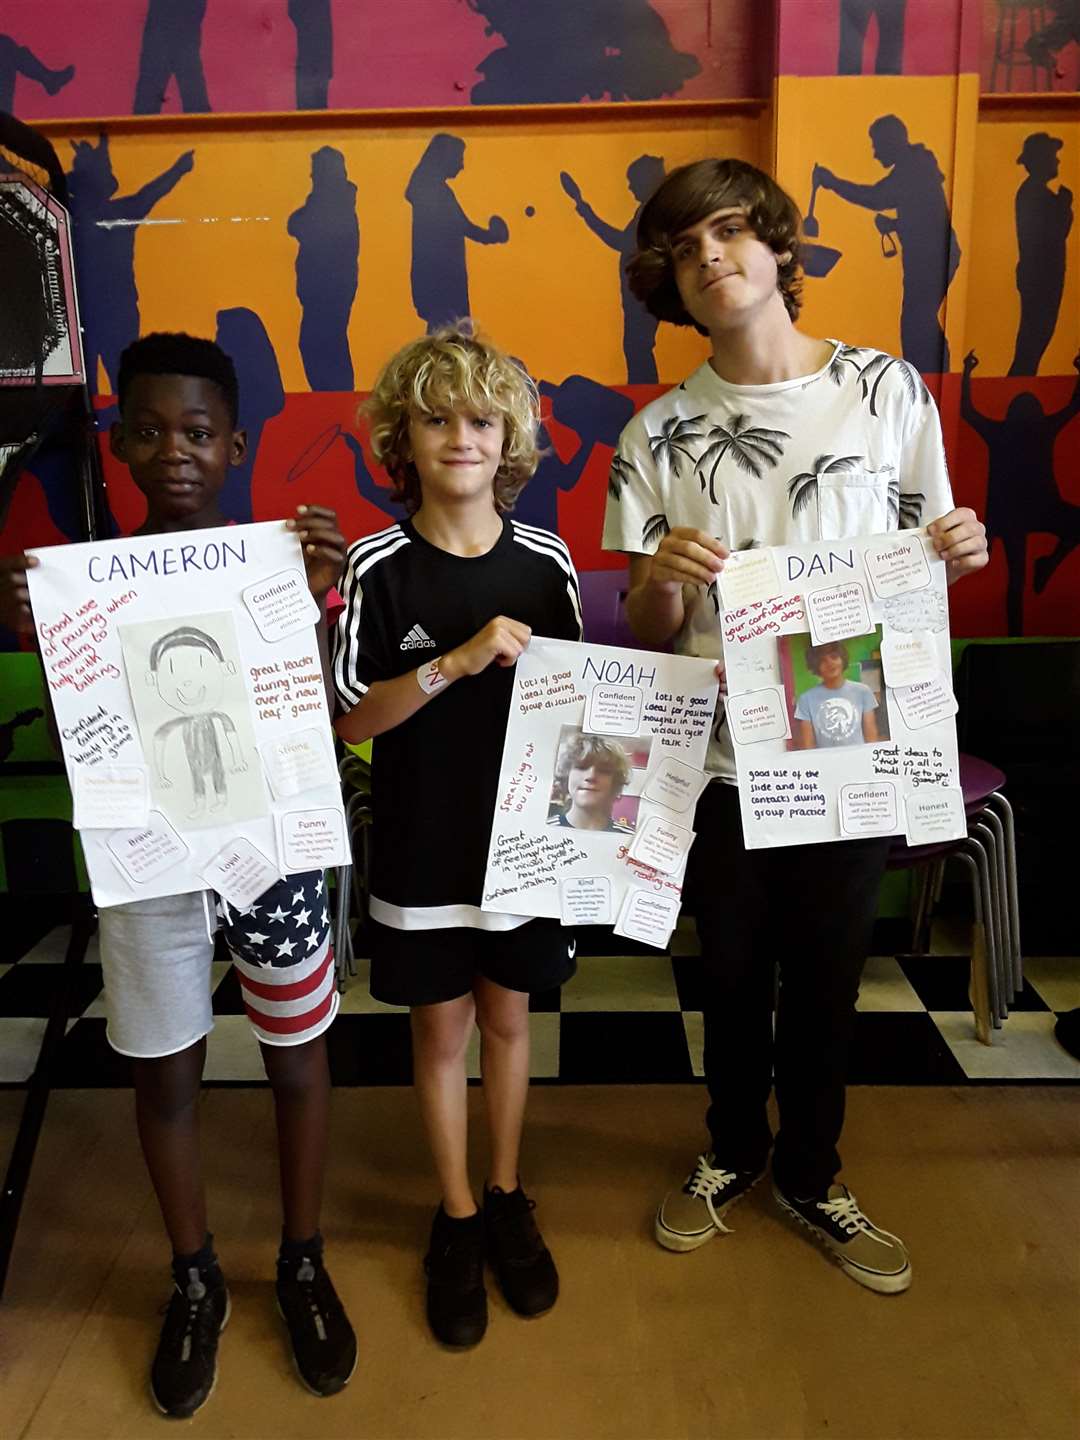 Cameron, 11, Noah, 10 and Dan, 17, with their positivity posters. (16130387)